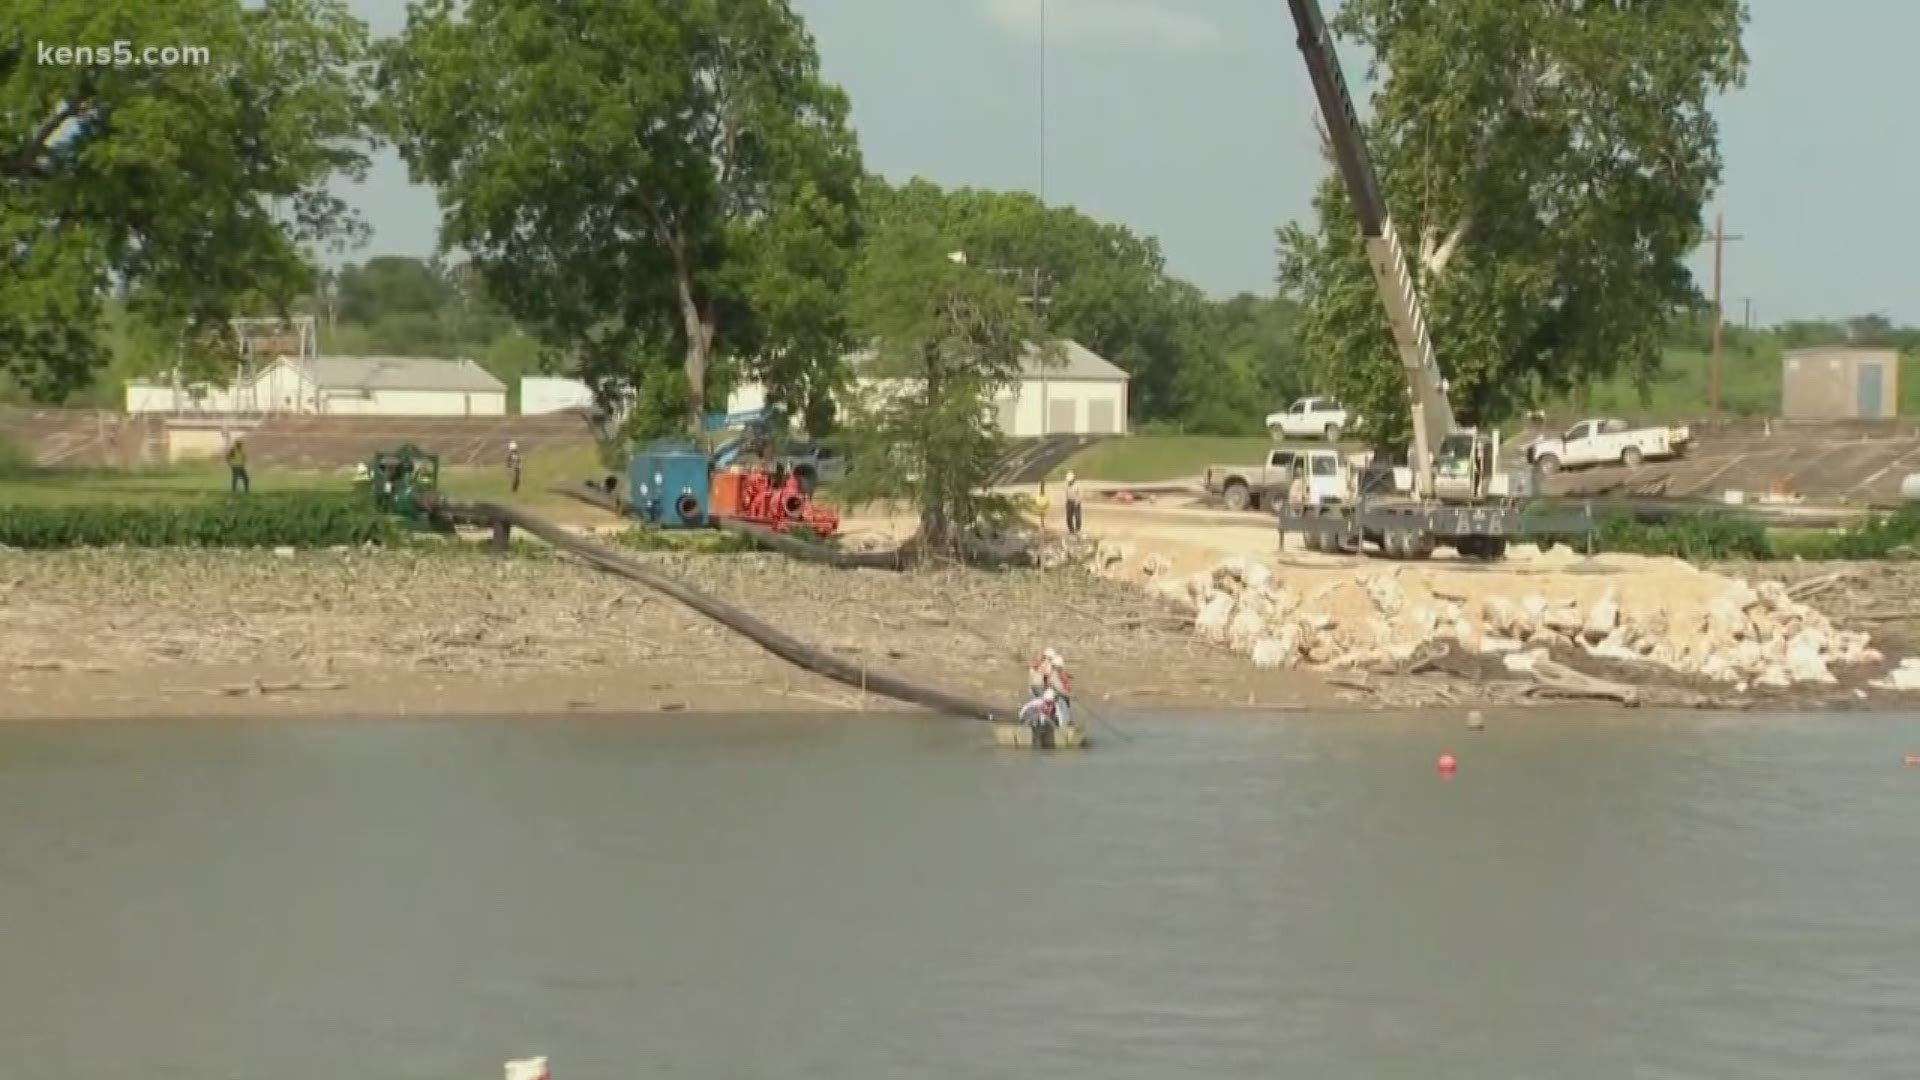 In the last week since the dam collapse, neighbors have called on lawmakers to get funding to repair the dam and restore their lake.